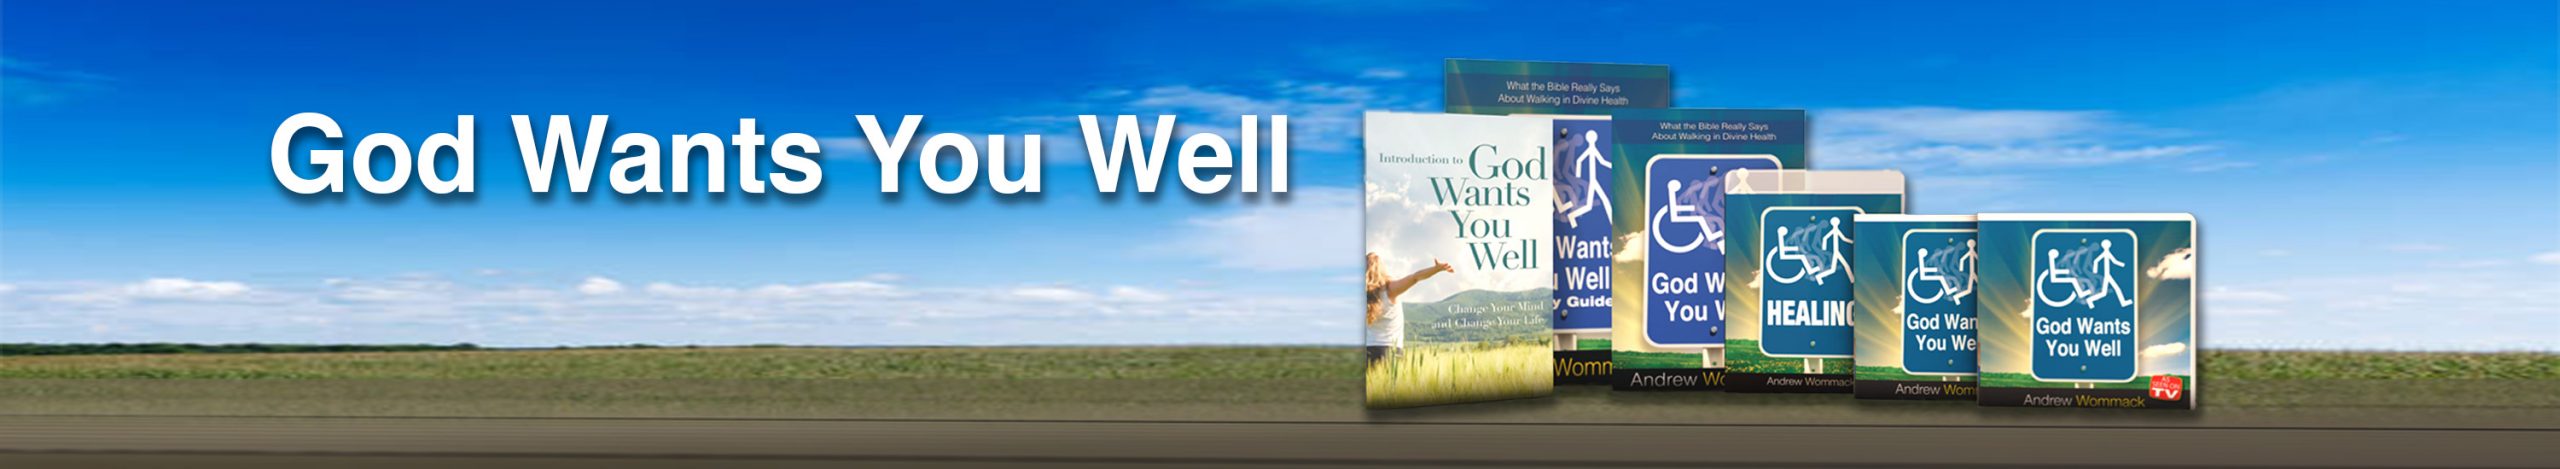 God Wants You Well Products Banner